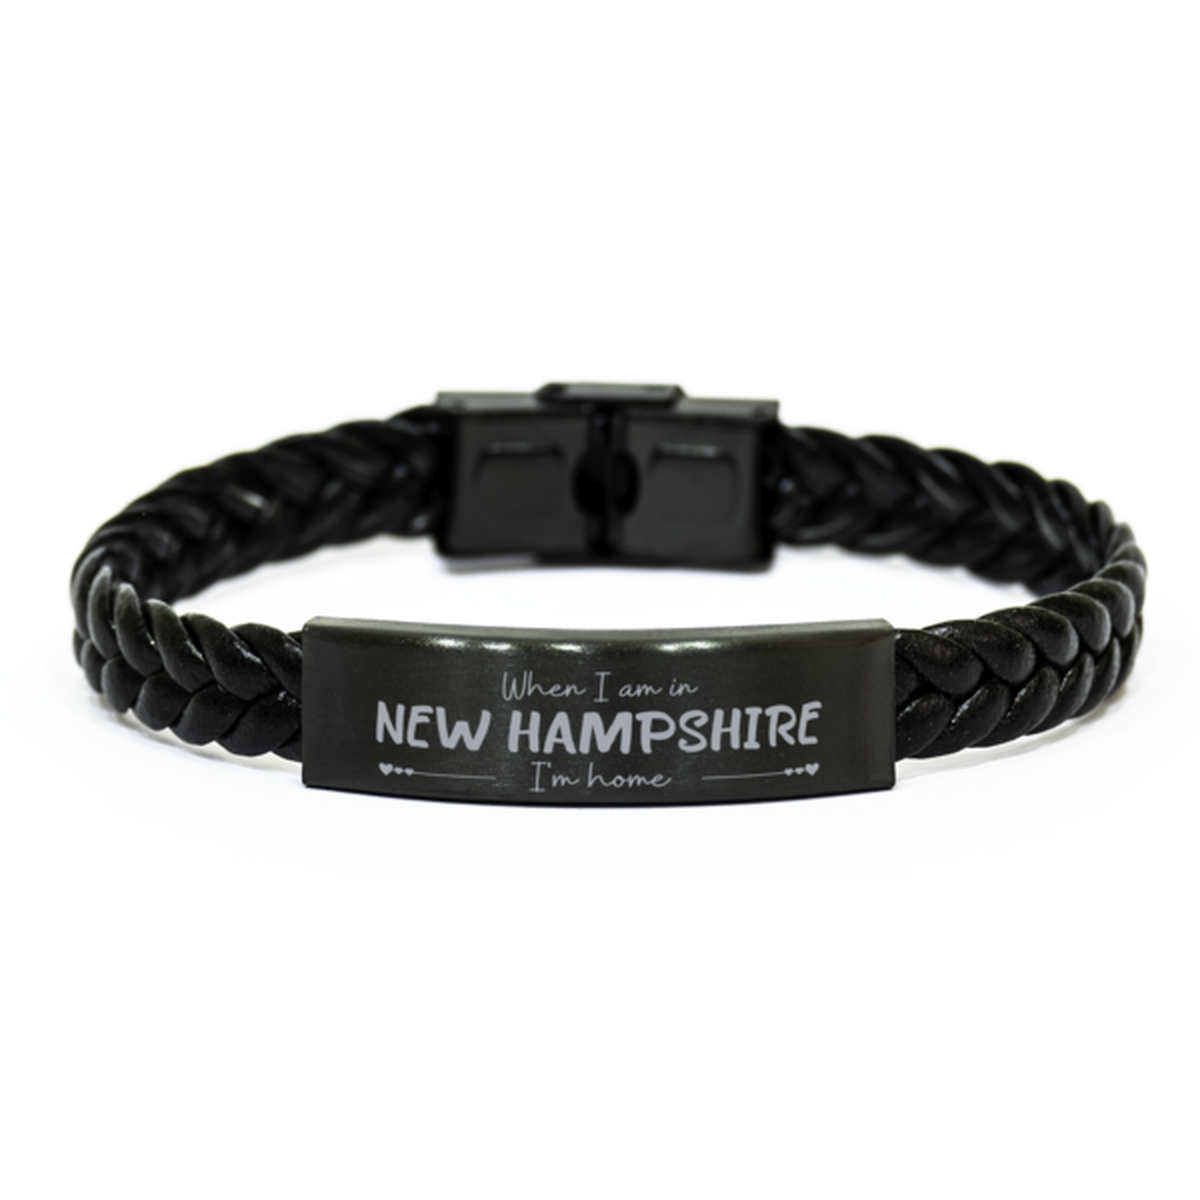 When I am in New Hampshire I'm home Braided Leather Bracelet, Cheap Gifts For New Hampshire, State New Hampshire Birthday Gifts for Friends Coworker